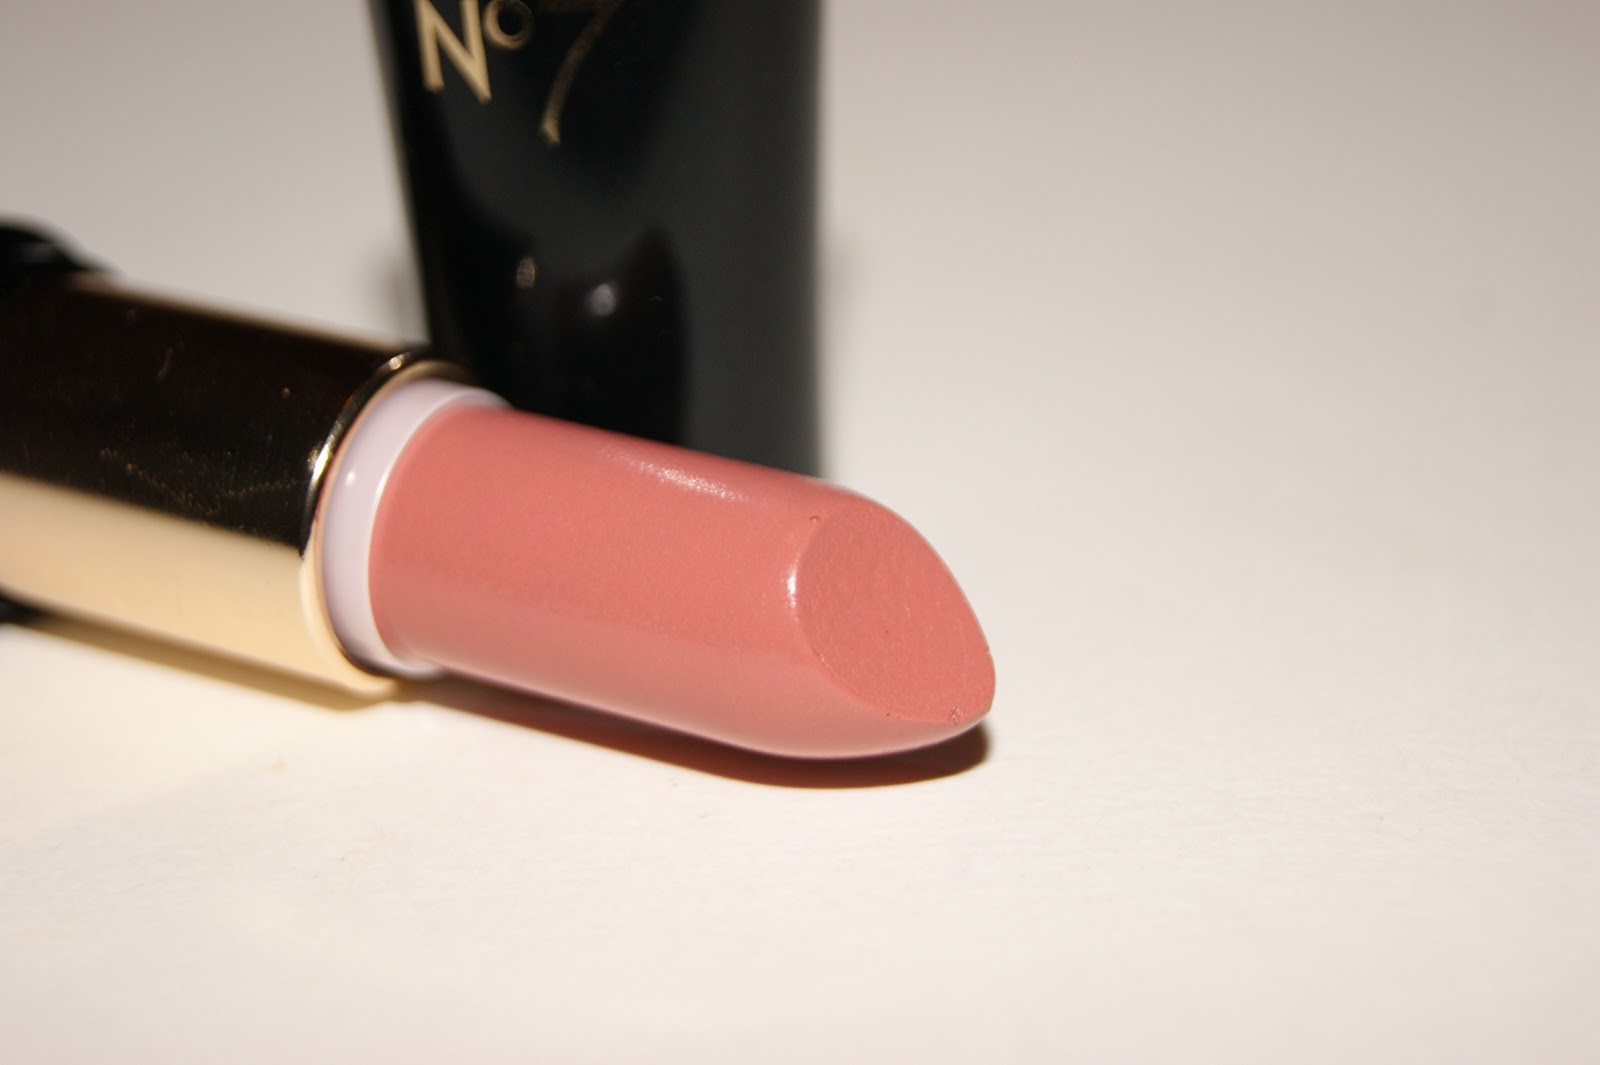 No 7 Moisture Drench Lipstick In 04 Romantic Review The Sunday Girl